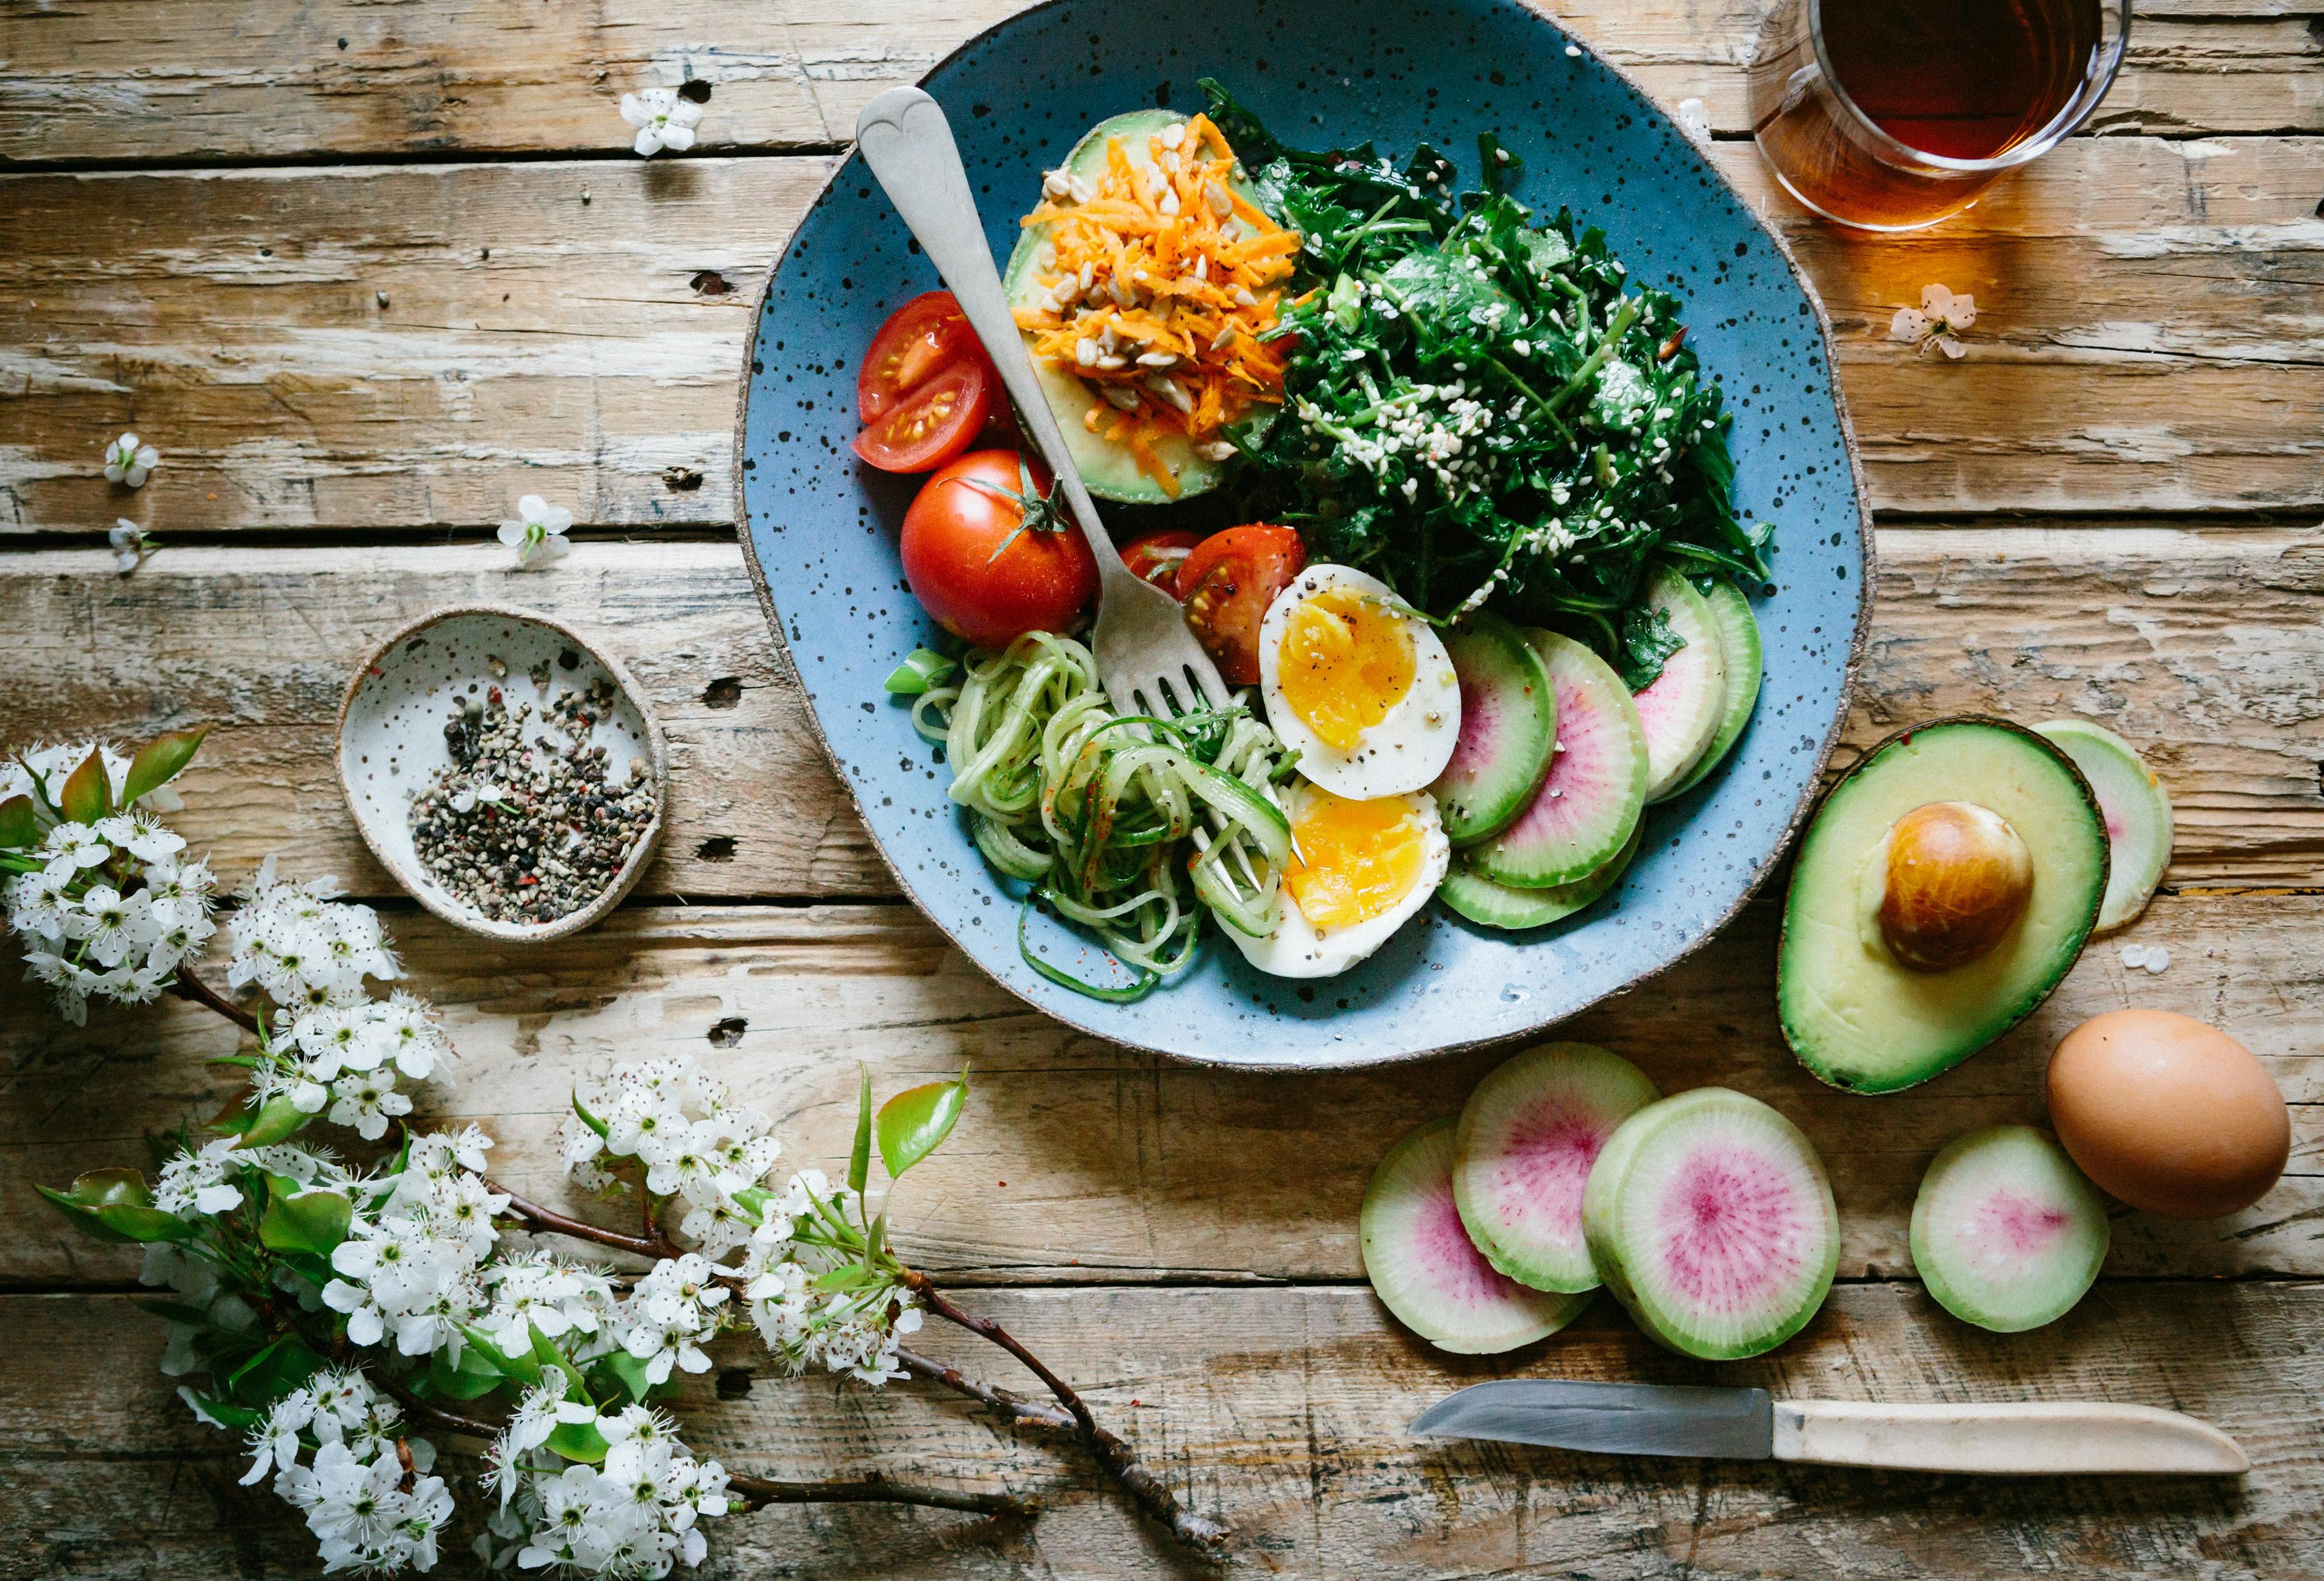 a flat lay of a salad on a bowl, some fruits, and flowers on a wooden surface